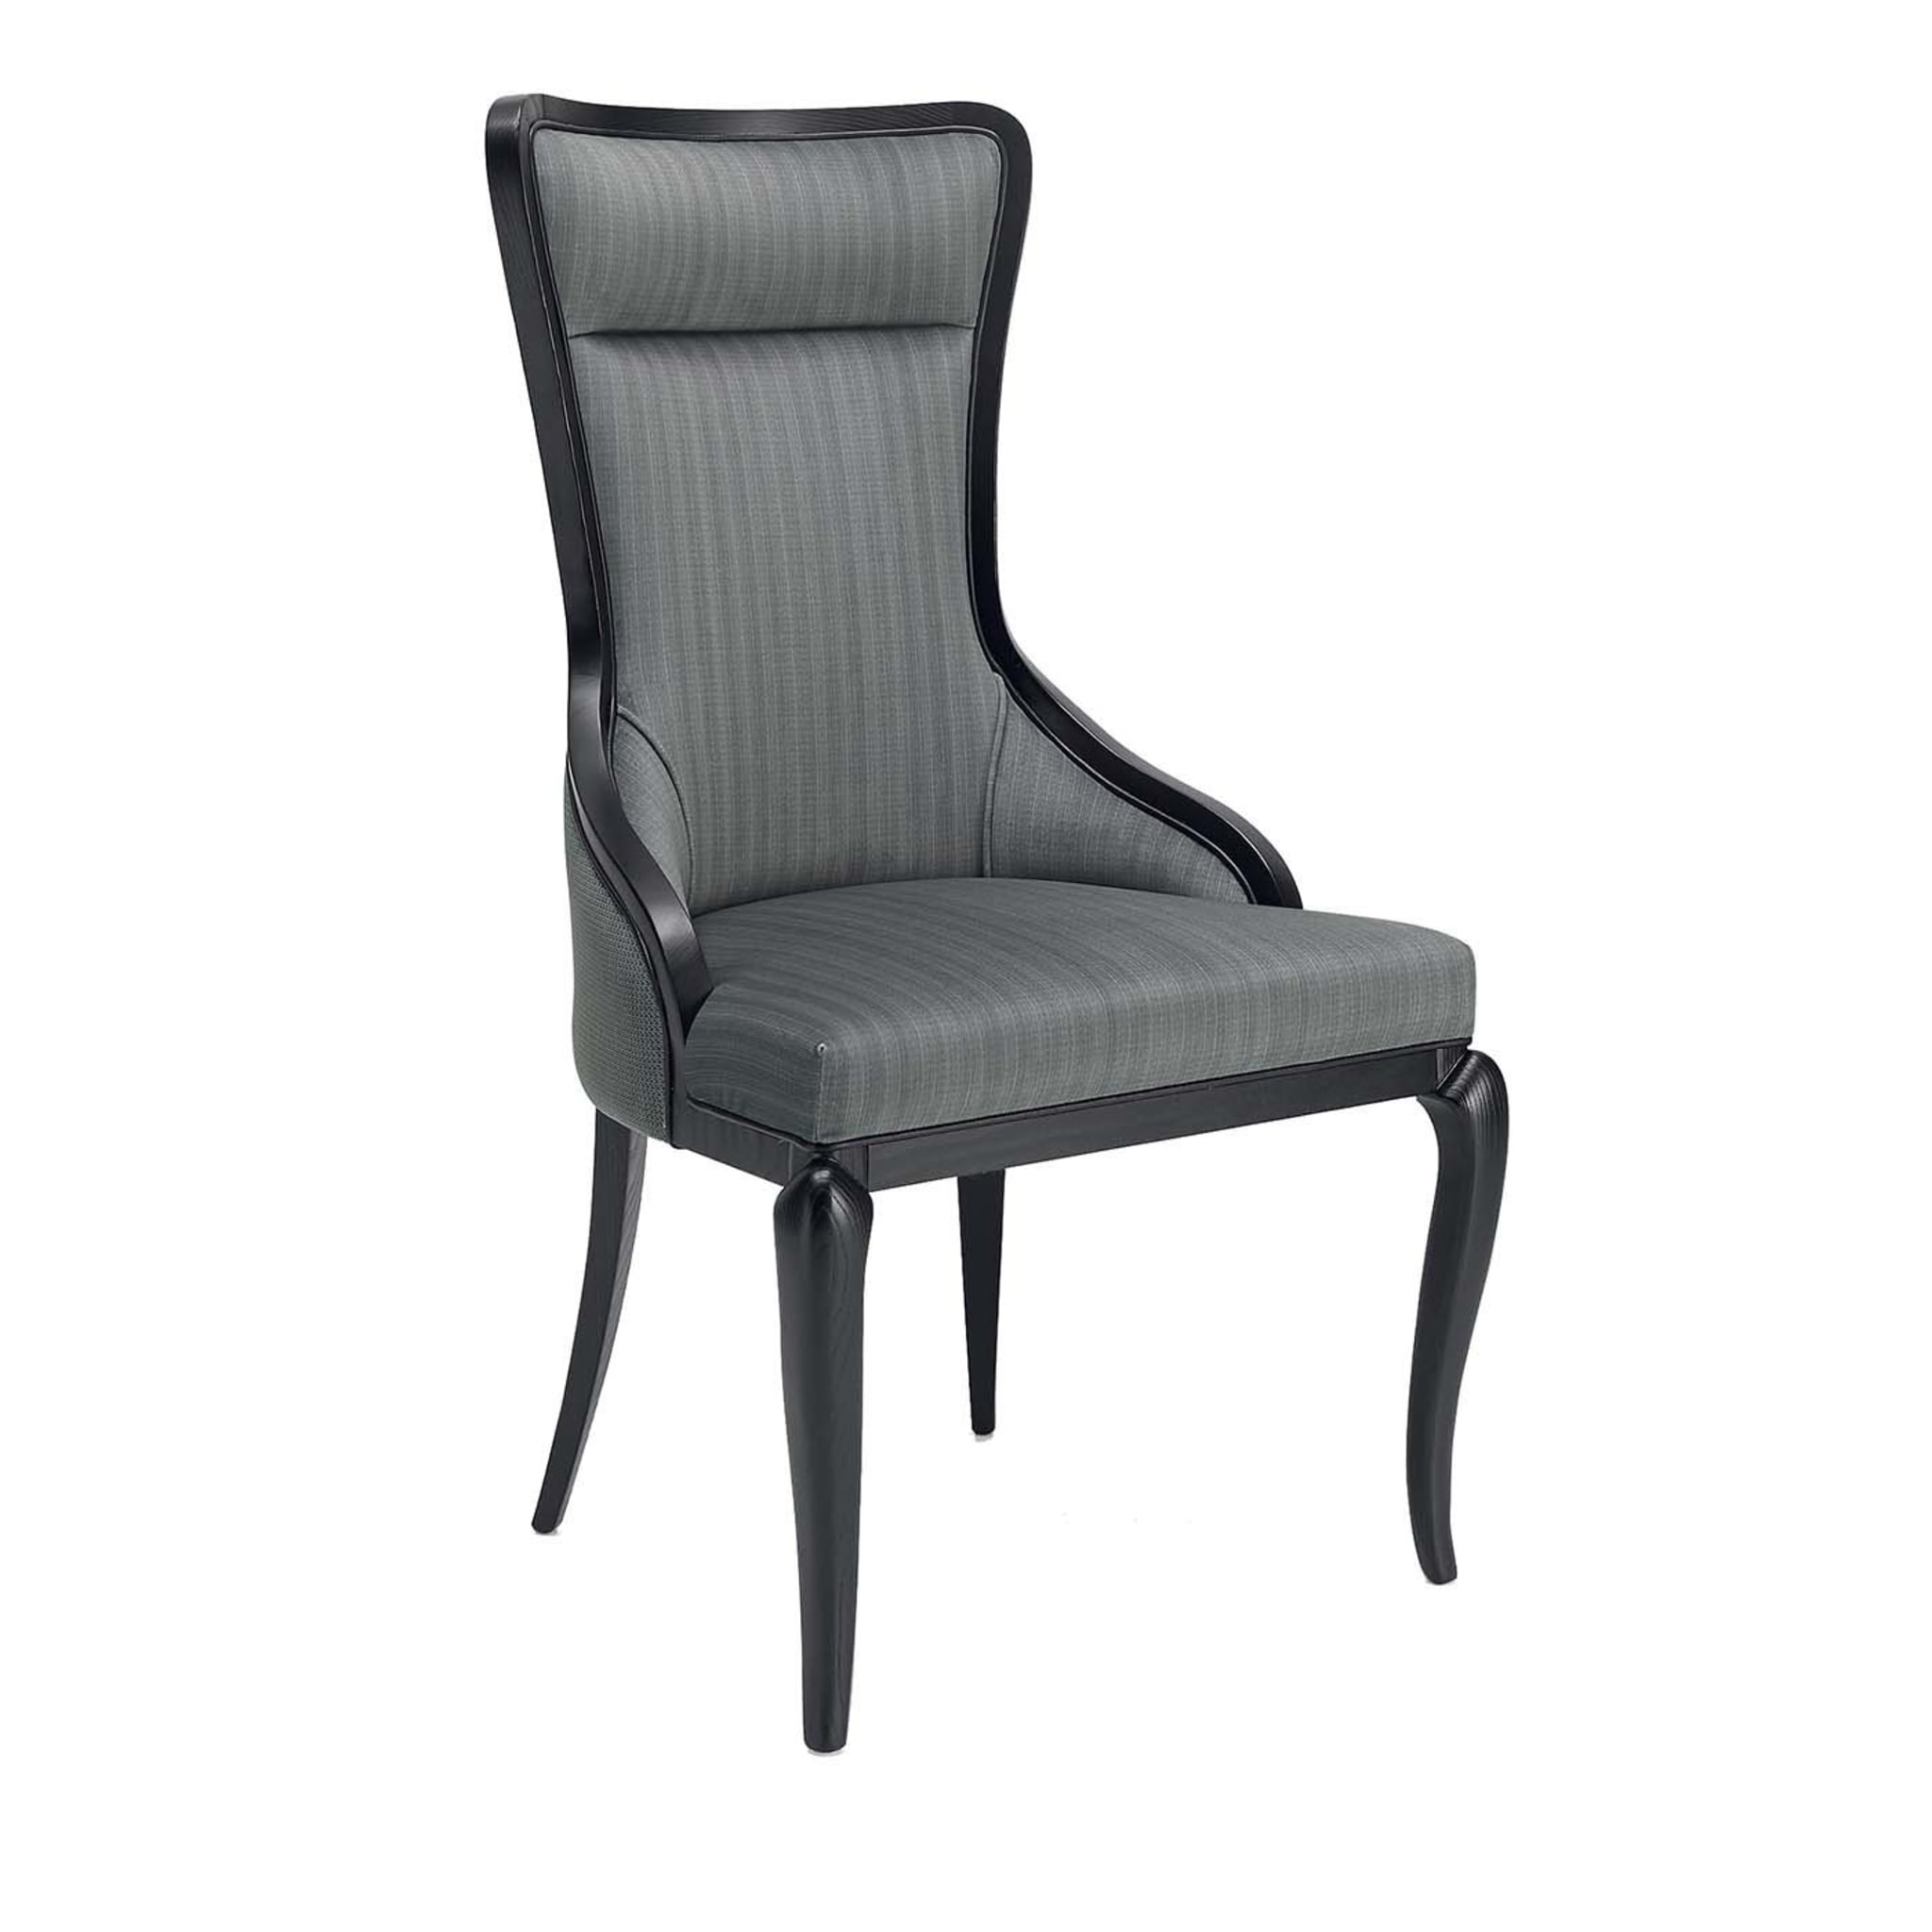 Gray Upholstered Chair - Main view